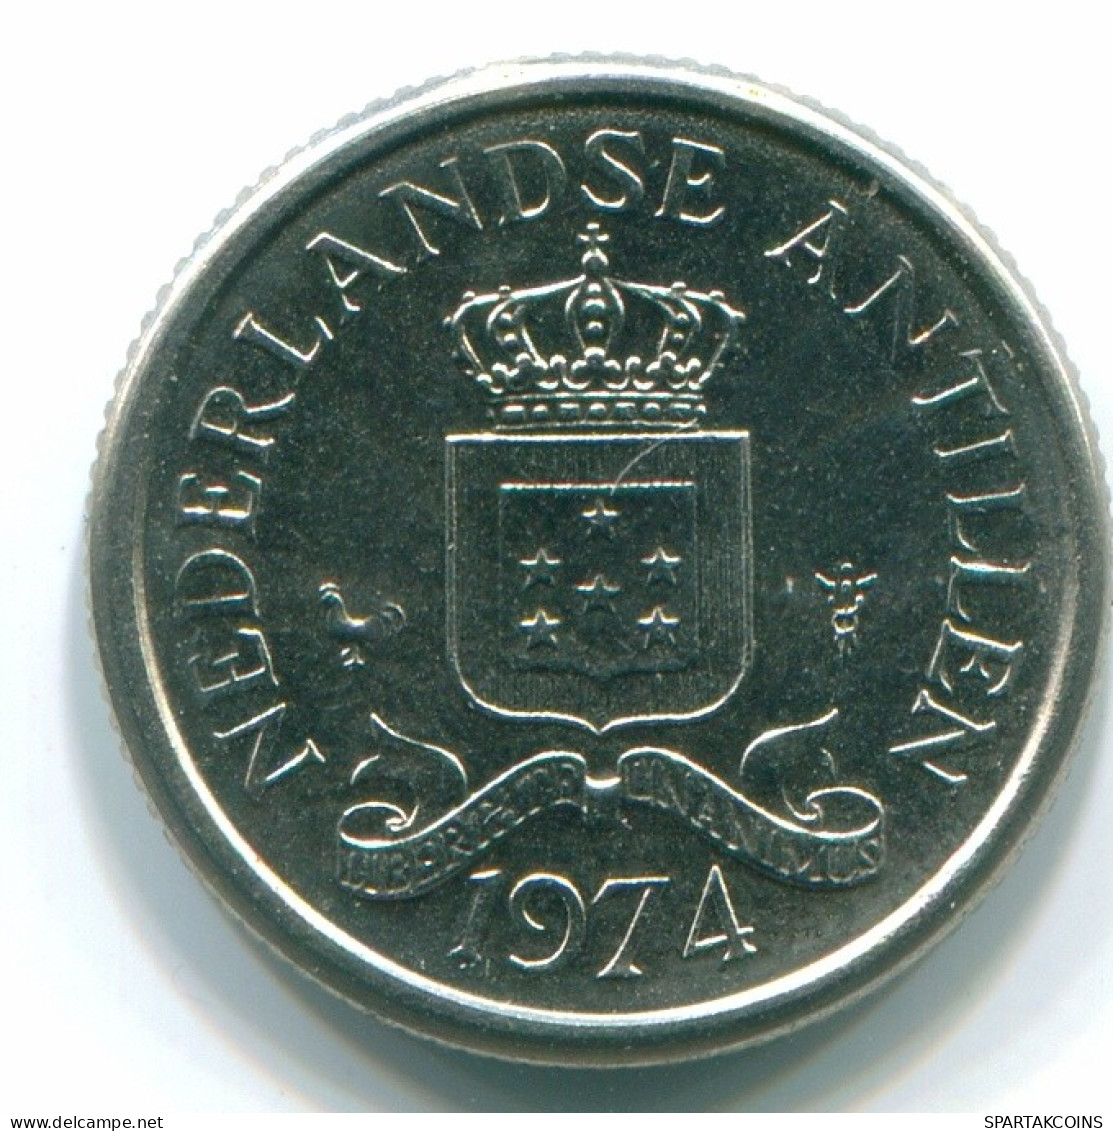 10 CENTS 1974 NETHERLANDS ANTILLES Nickel Colonial Coin #S13512.U.A - Antille Olandesi